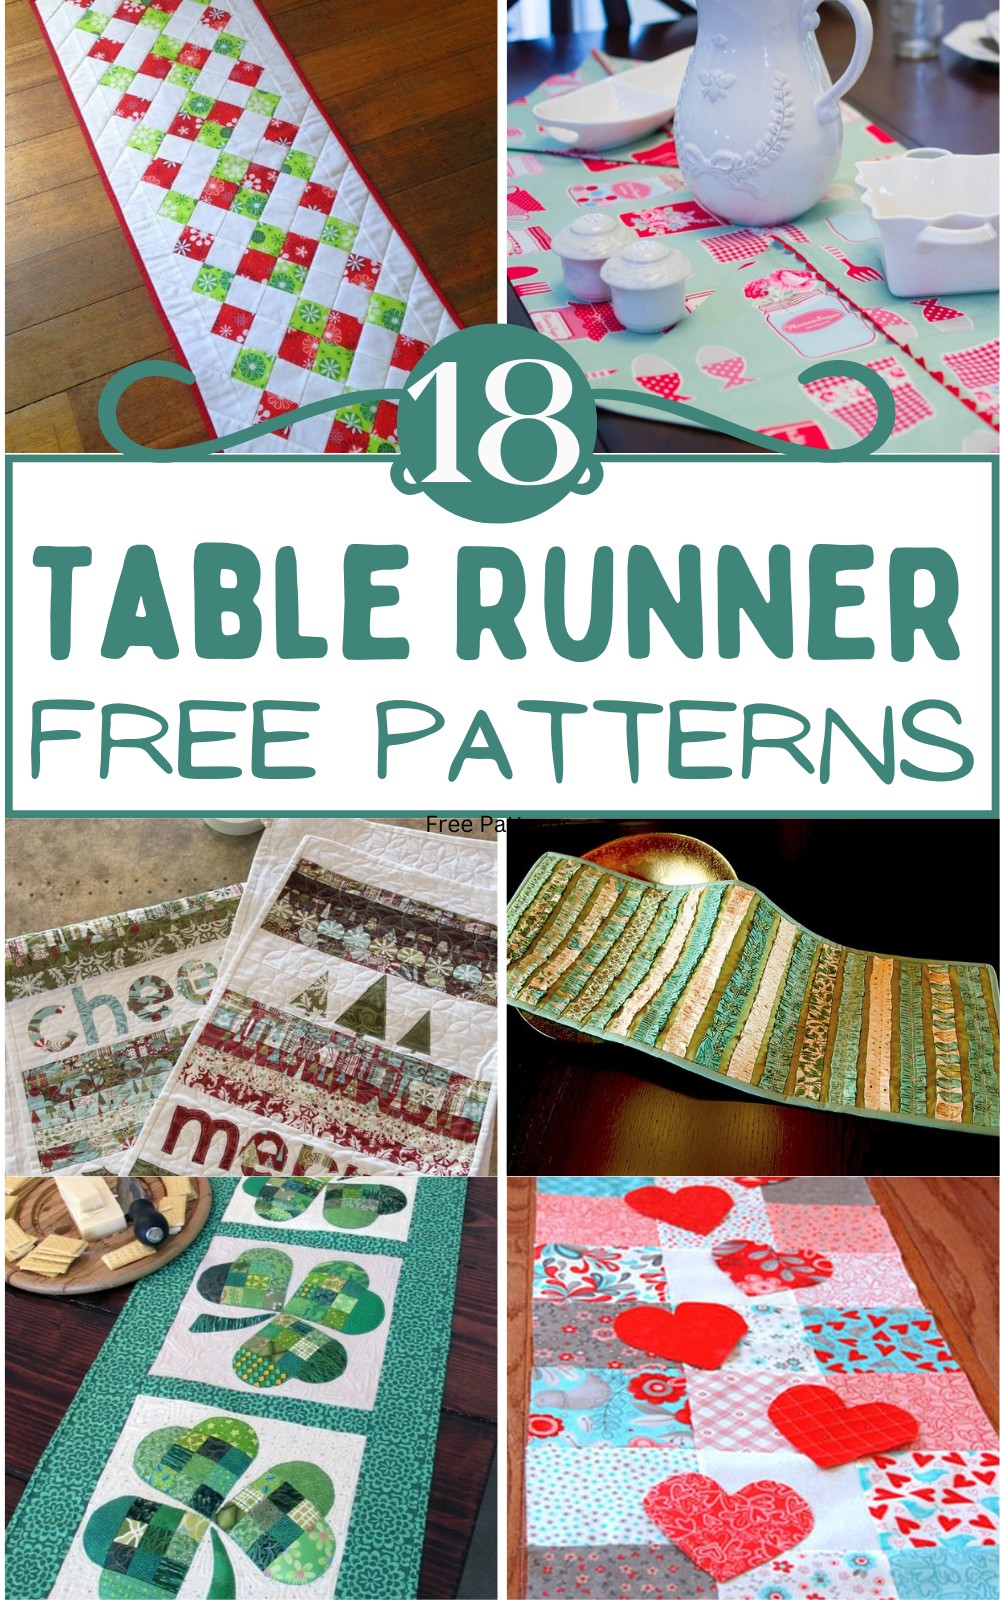 Free Table Runner Patterns 1